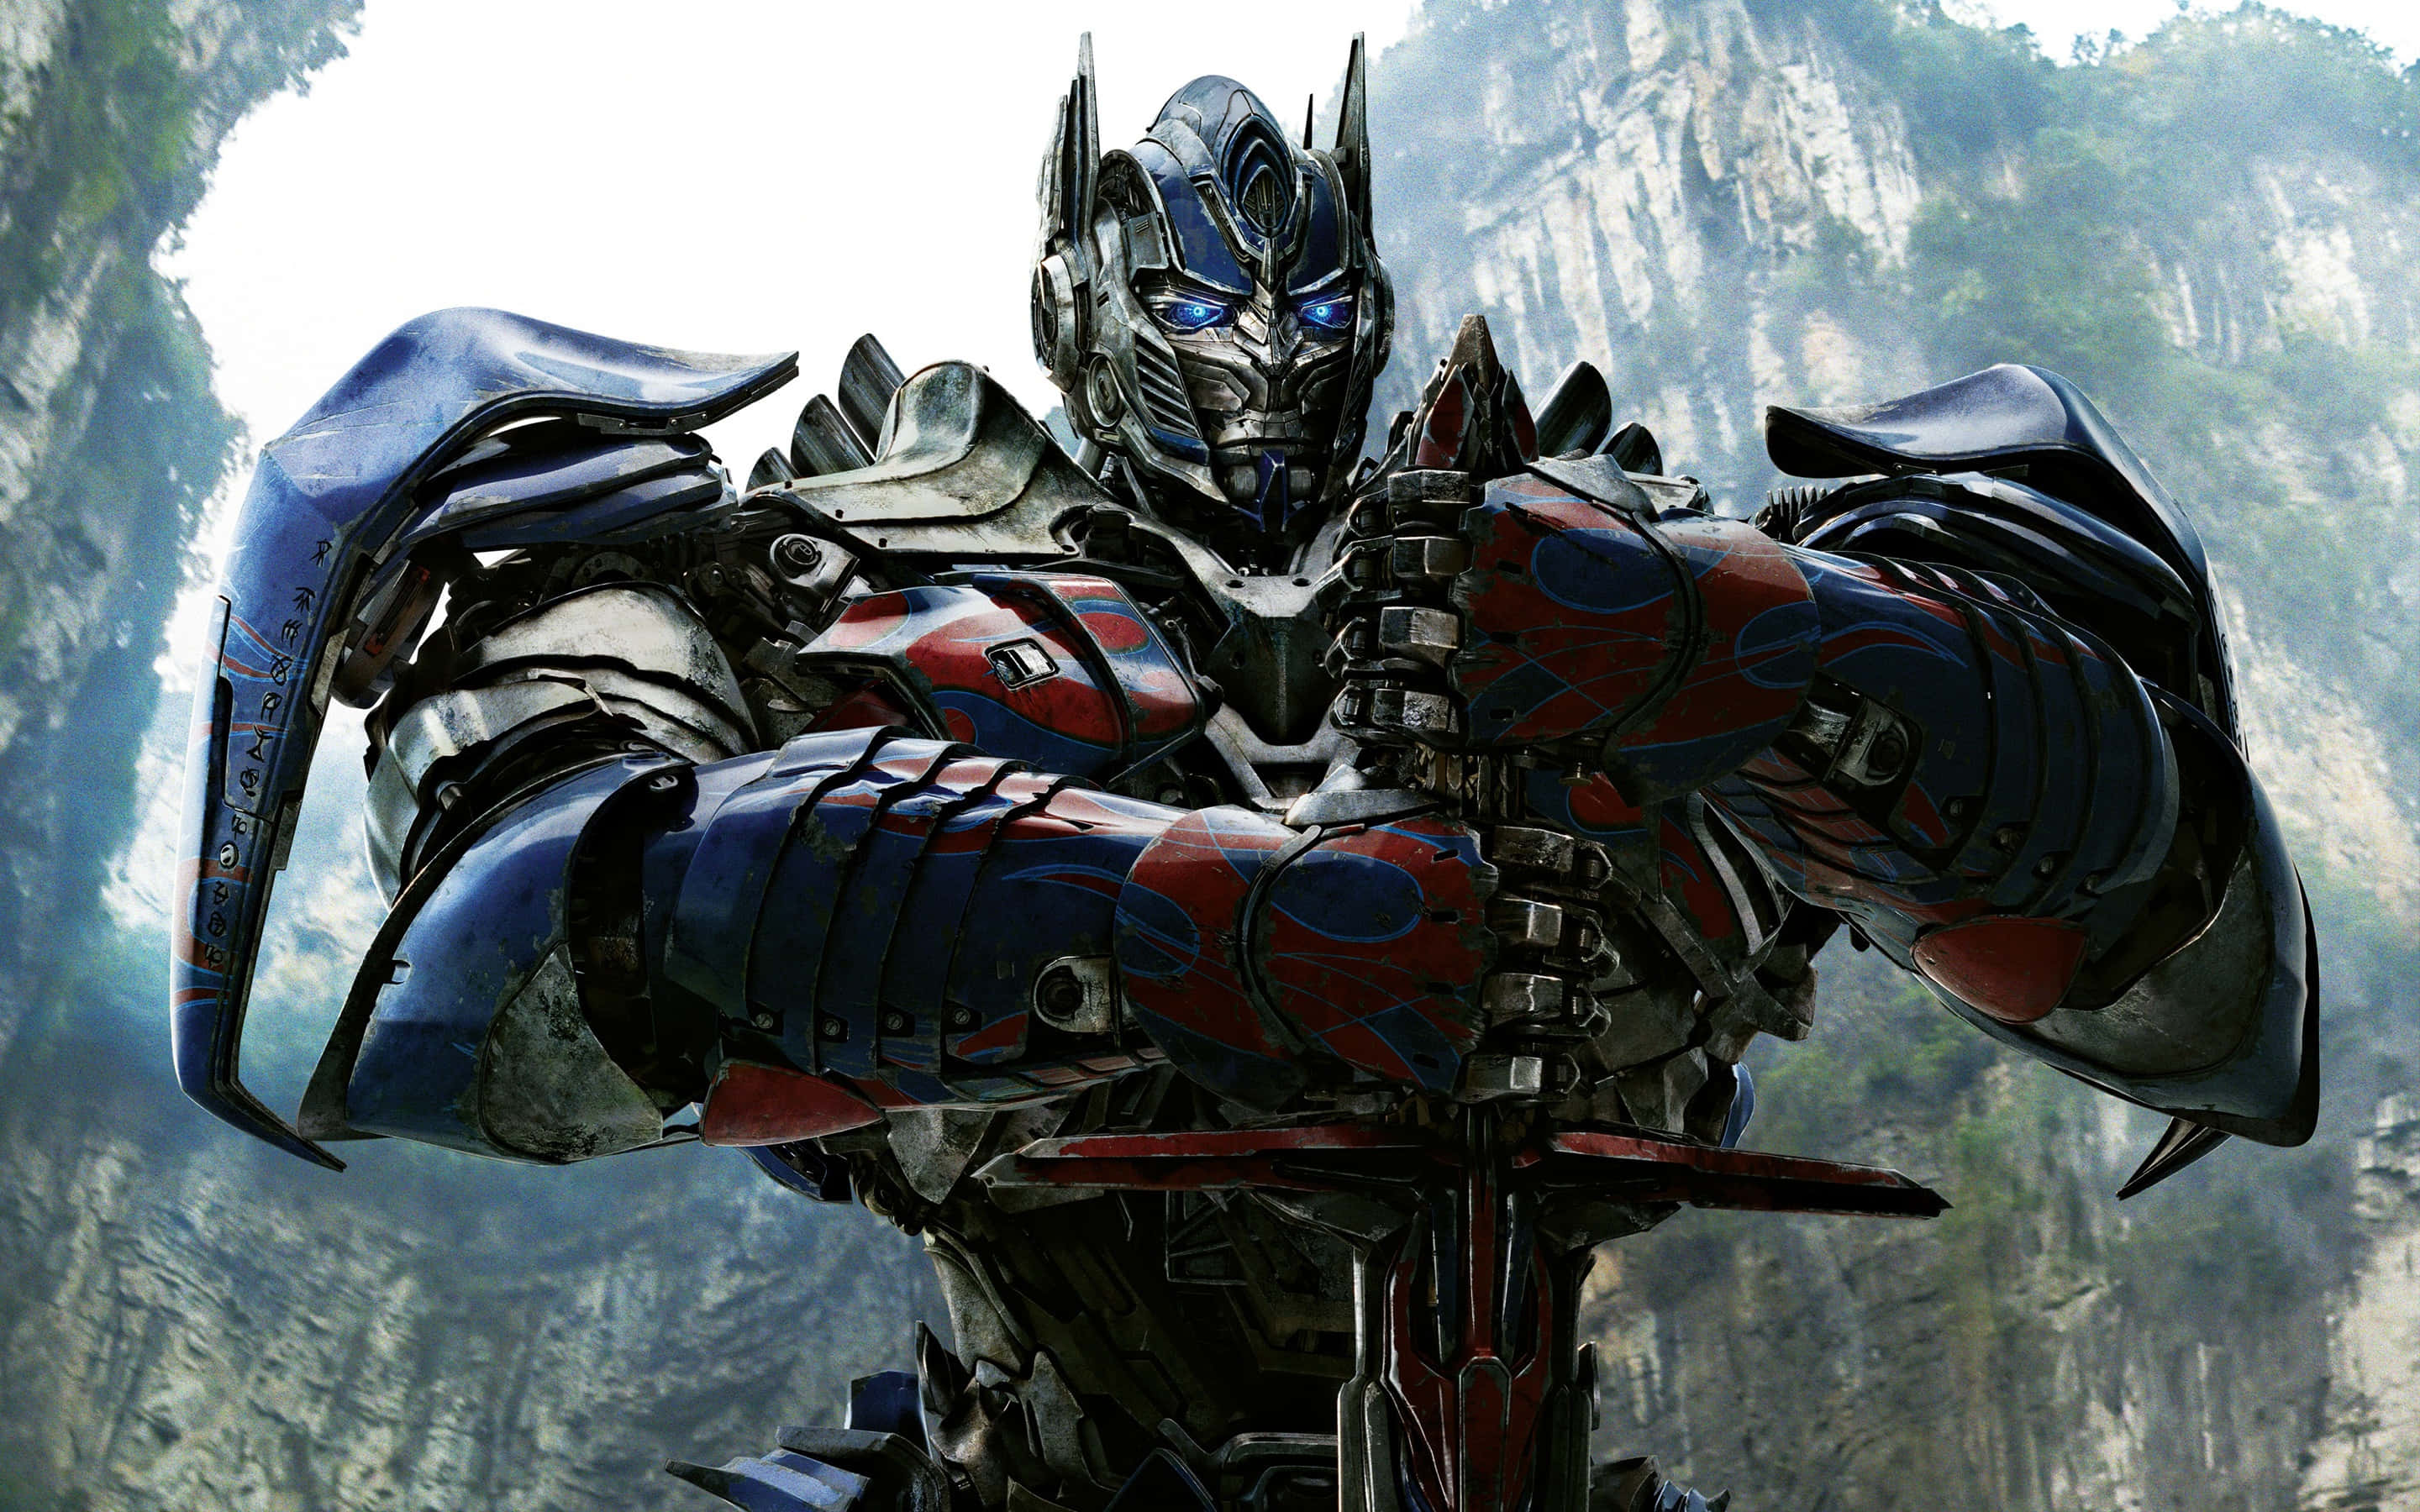 Optimus Prime, leader of the Autobots from the Transformers universe